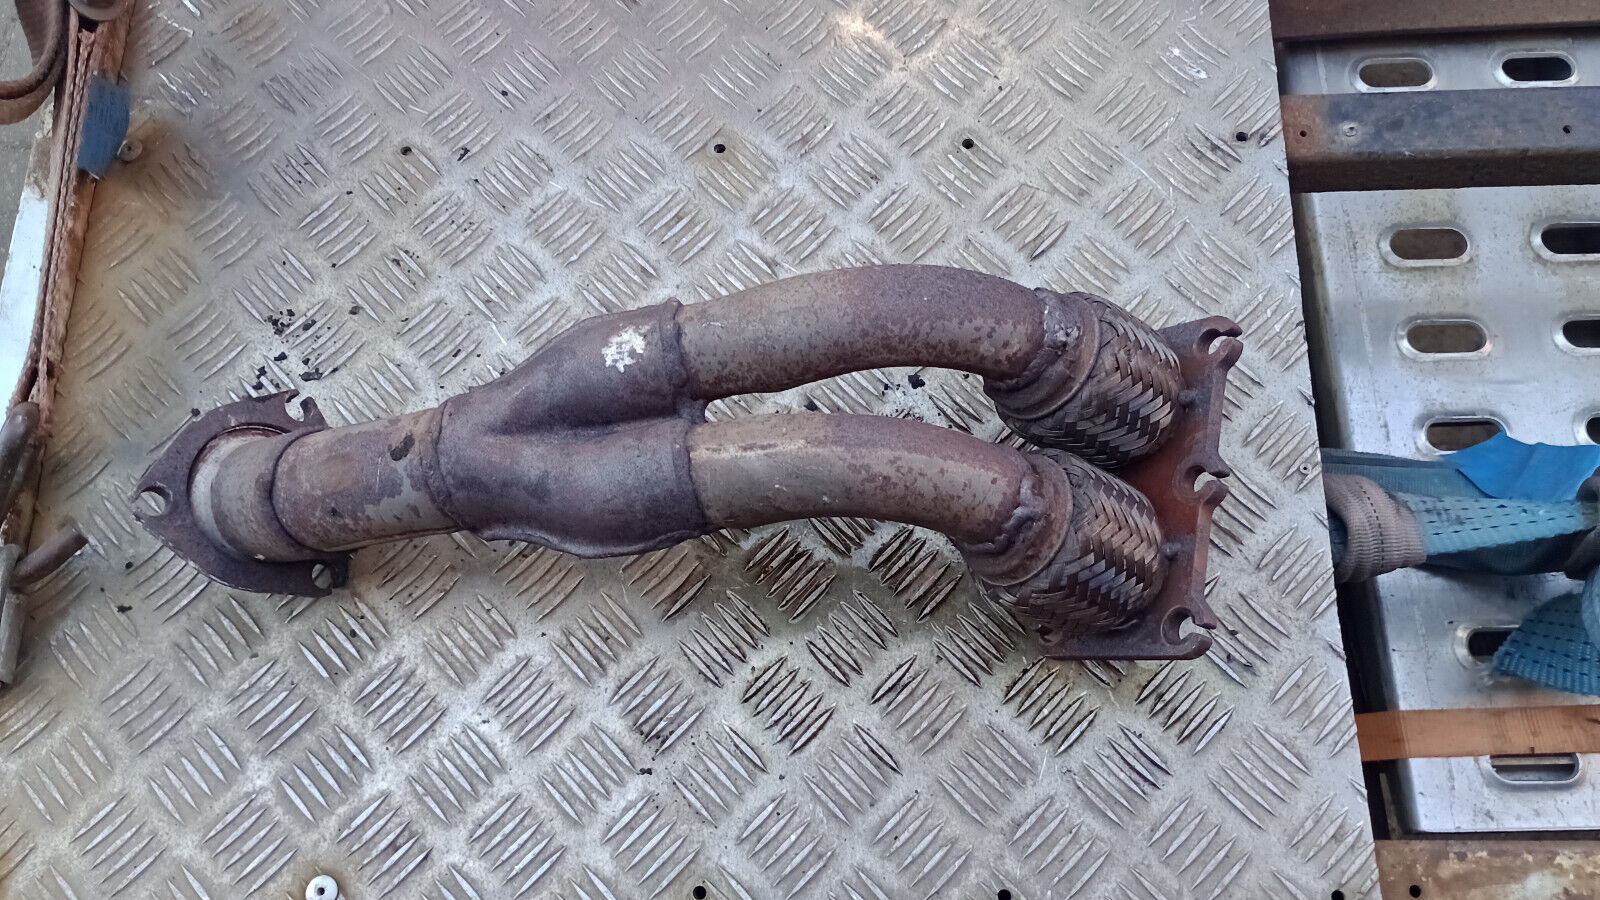 VW CORRADO 2.0 16V 9A EXHAUST DOWN PIPE COMPLETE FRONT SECTION